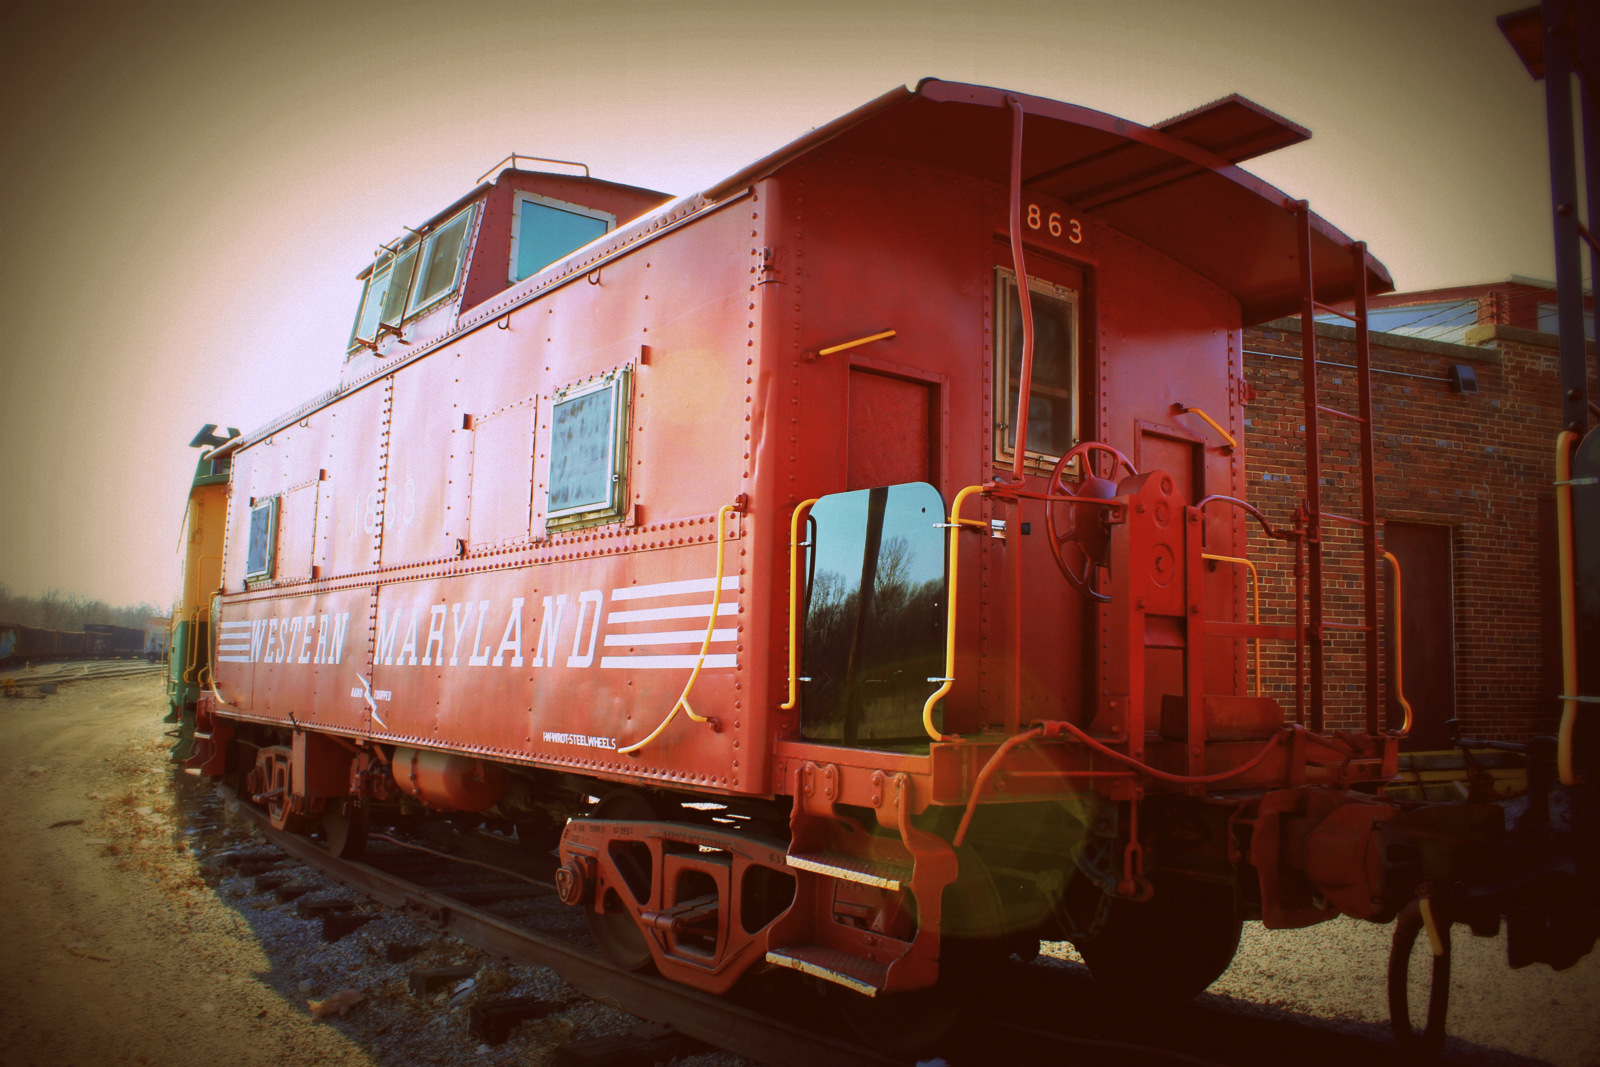 Rolling stock at the Hagerstown Roundhouse Museum - side view of a Western Maryland caboose 1859.